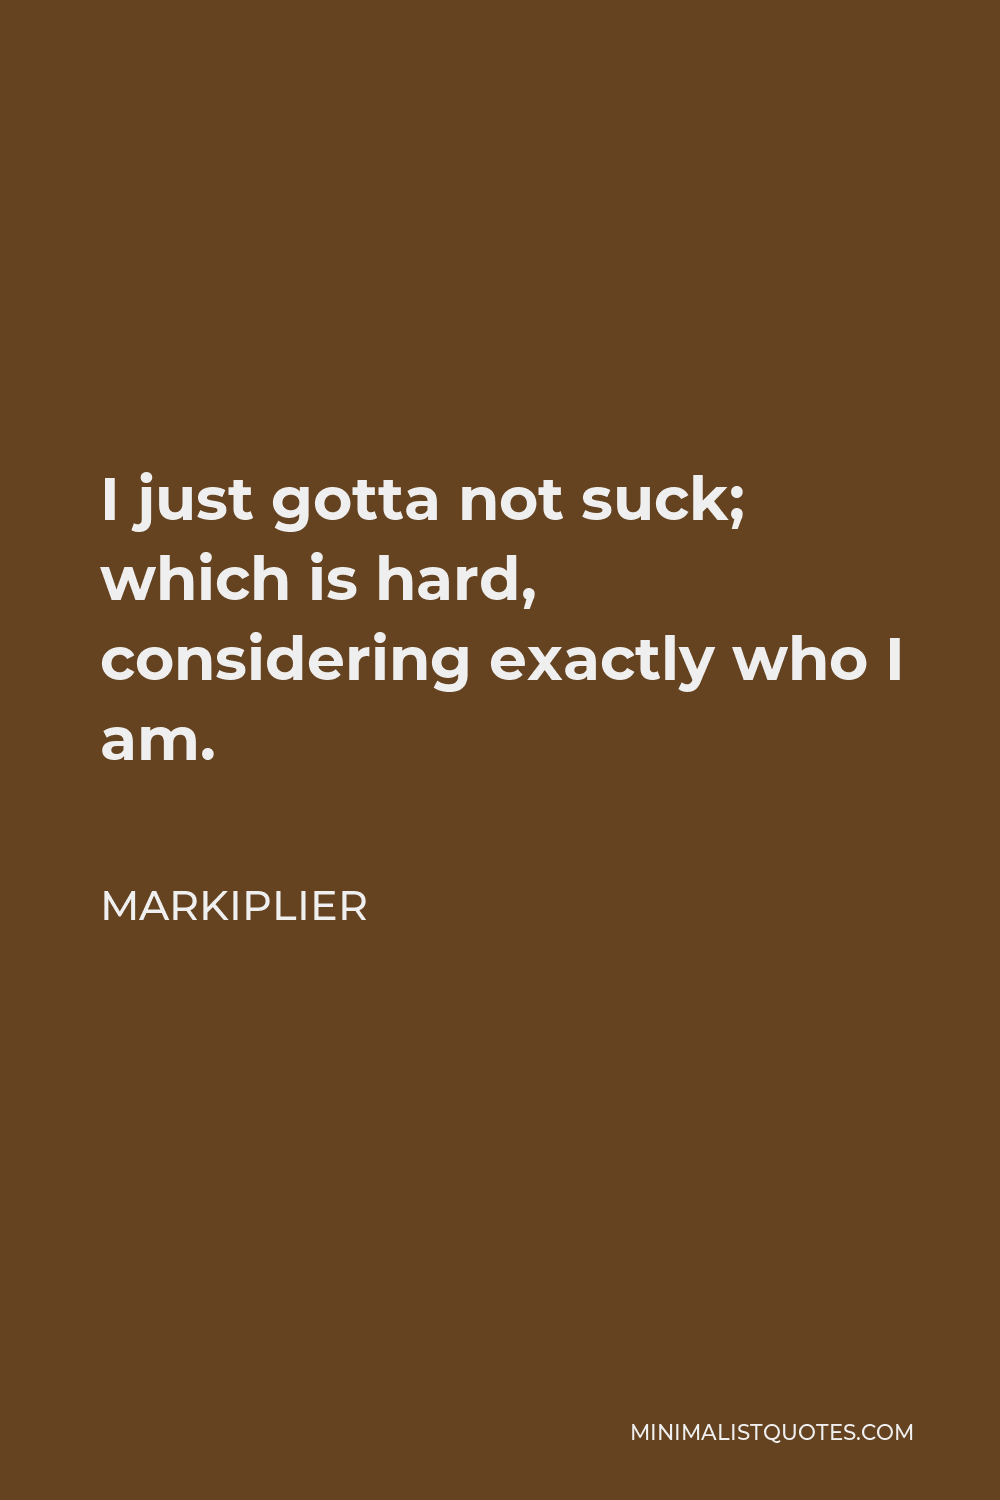 Markiplier Quote - I just gotta not suck; which is hard, considering exactly who I am.